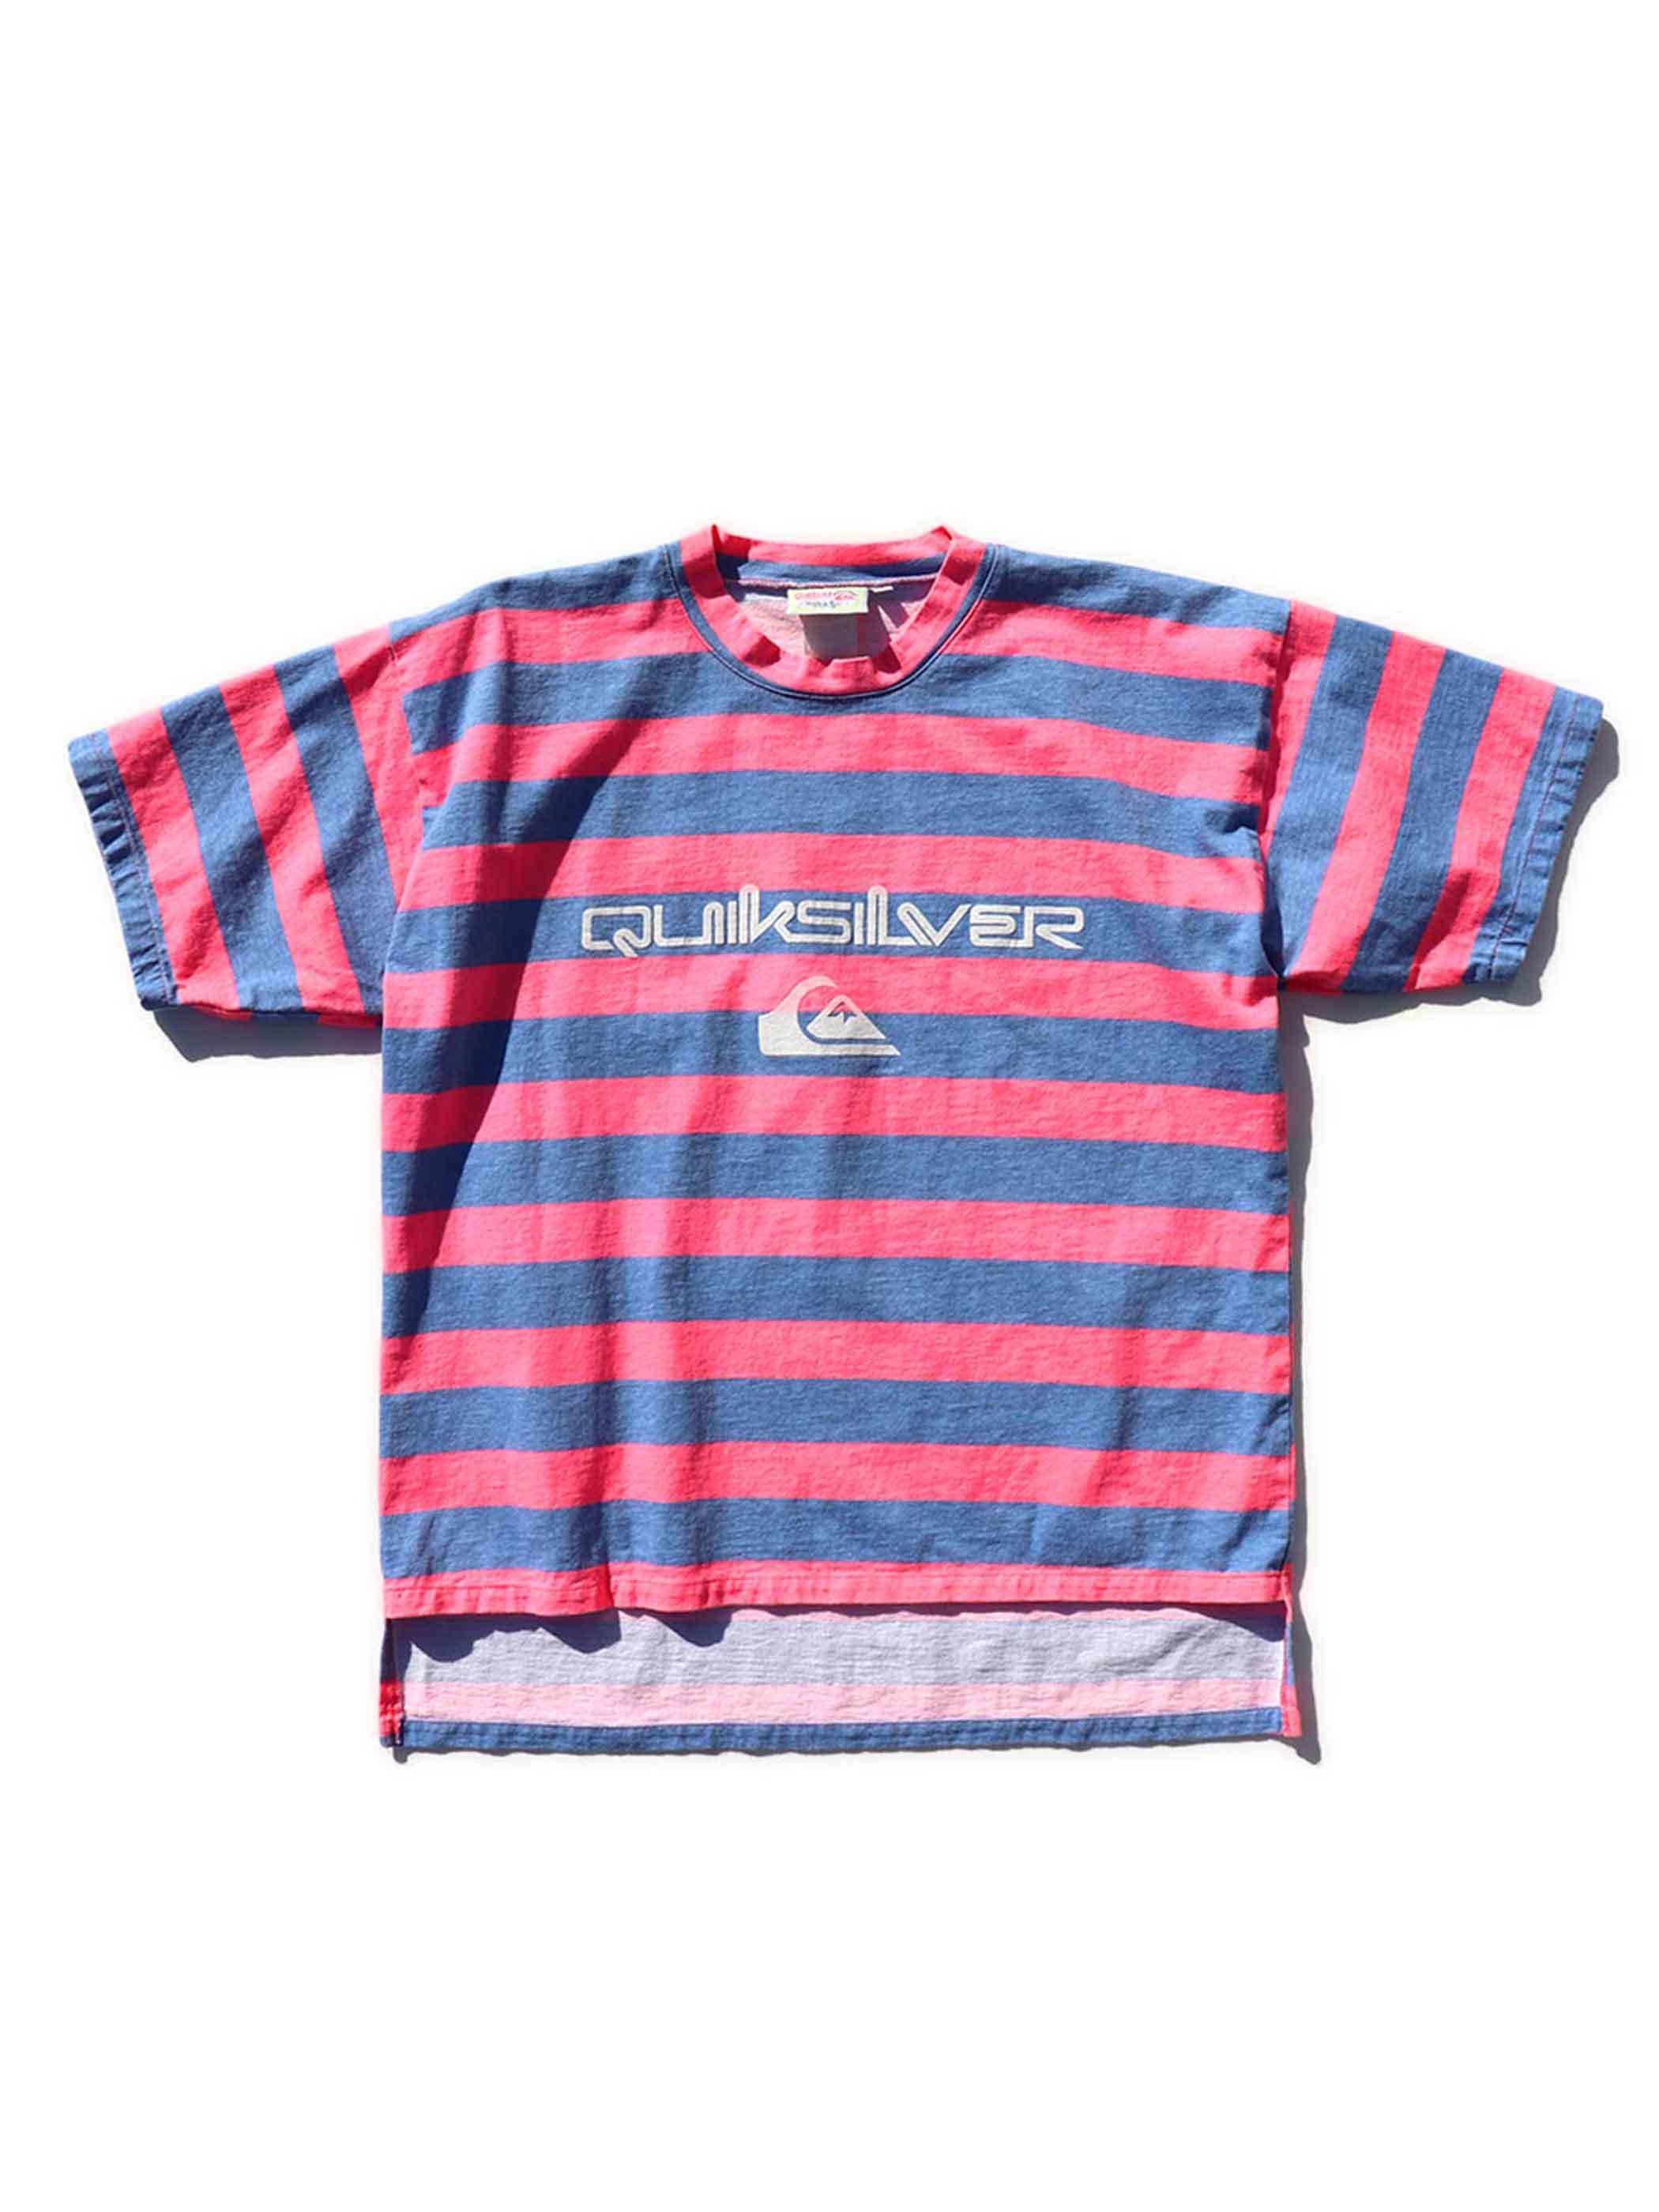 80 S Quiksilver ピンク ブルー プリントボーダーtシャツ M Post Junk Houyhnhnm S